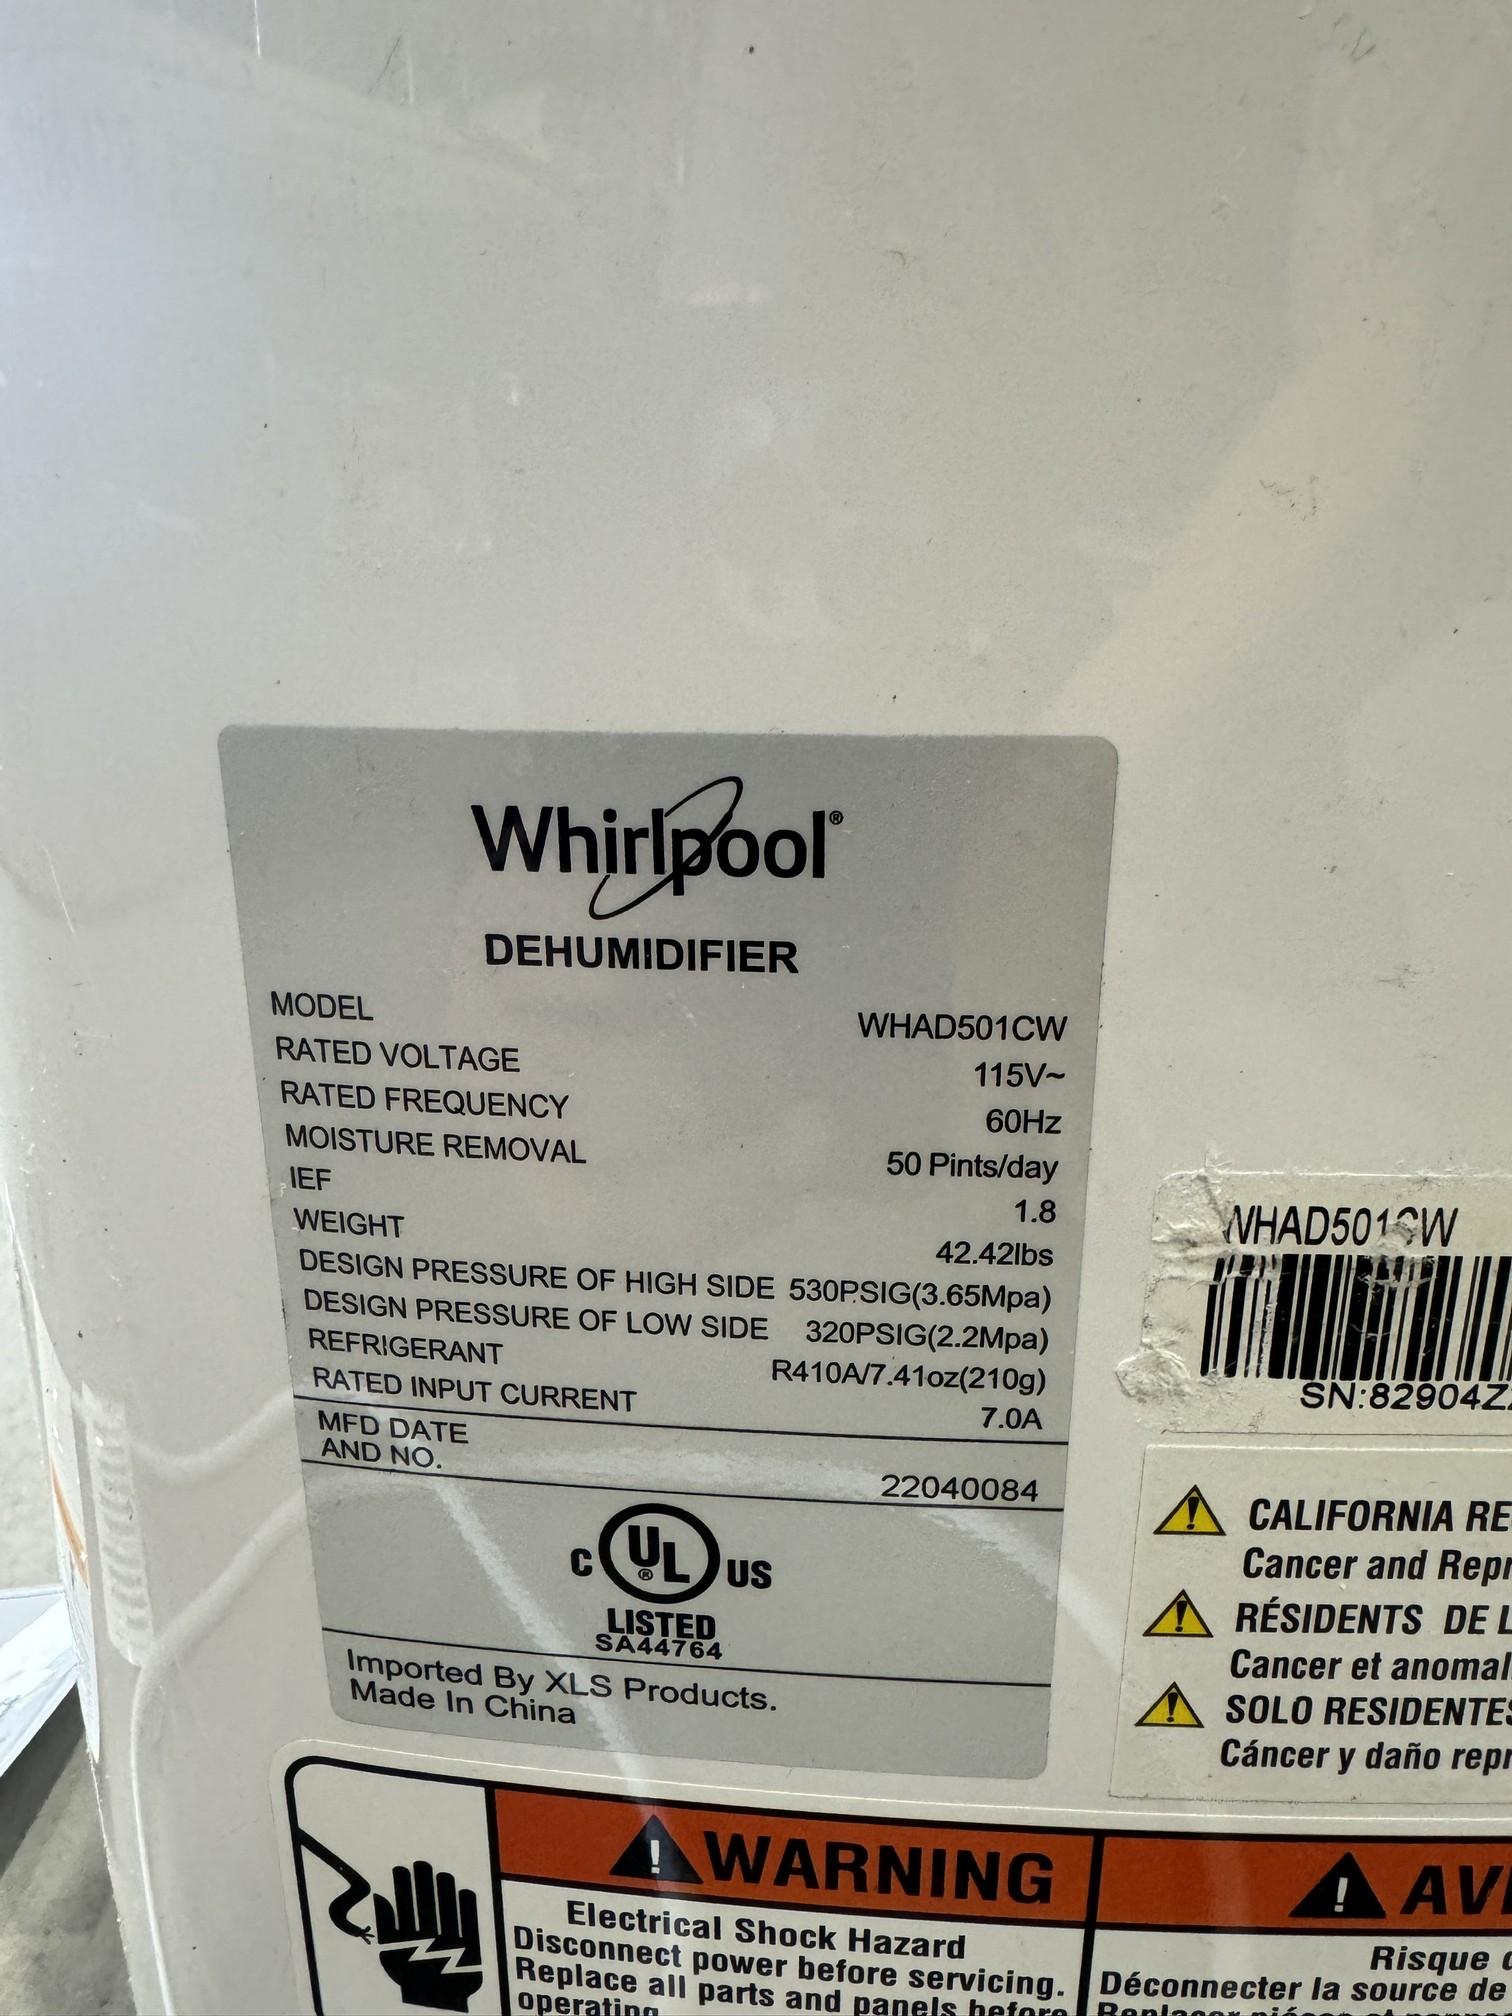 Whirlpool Dehumidifier in Replacement Box